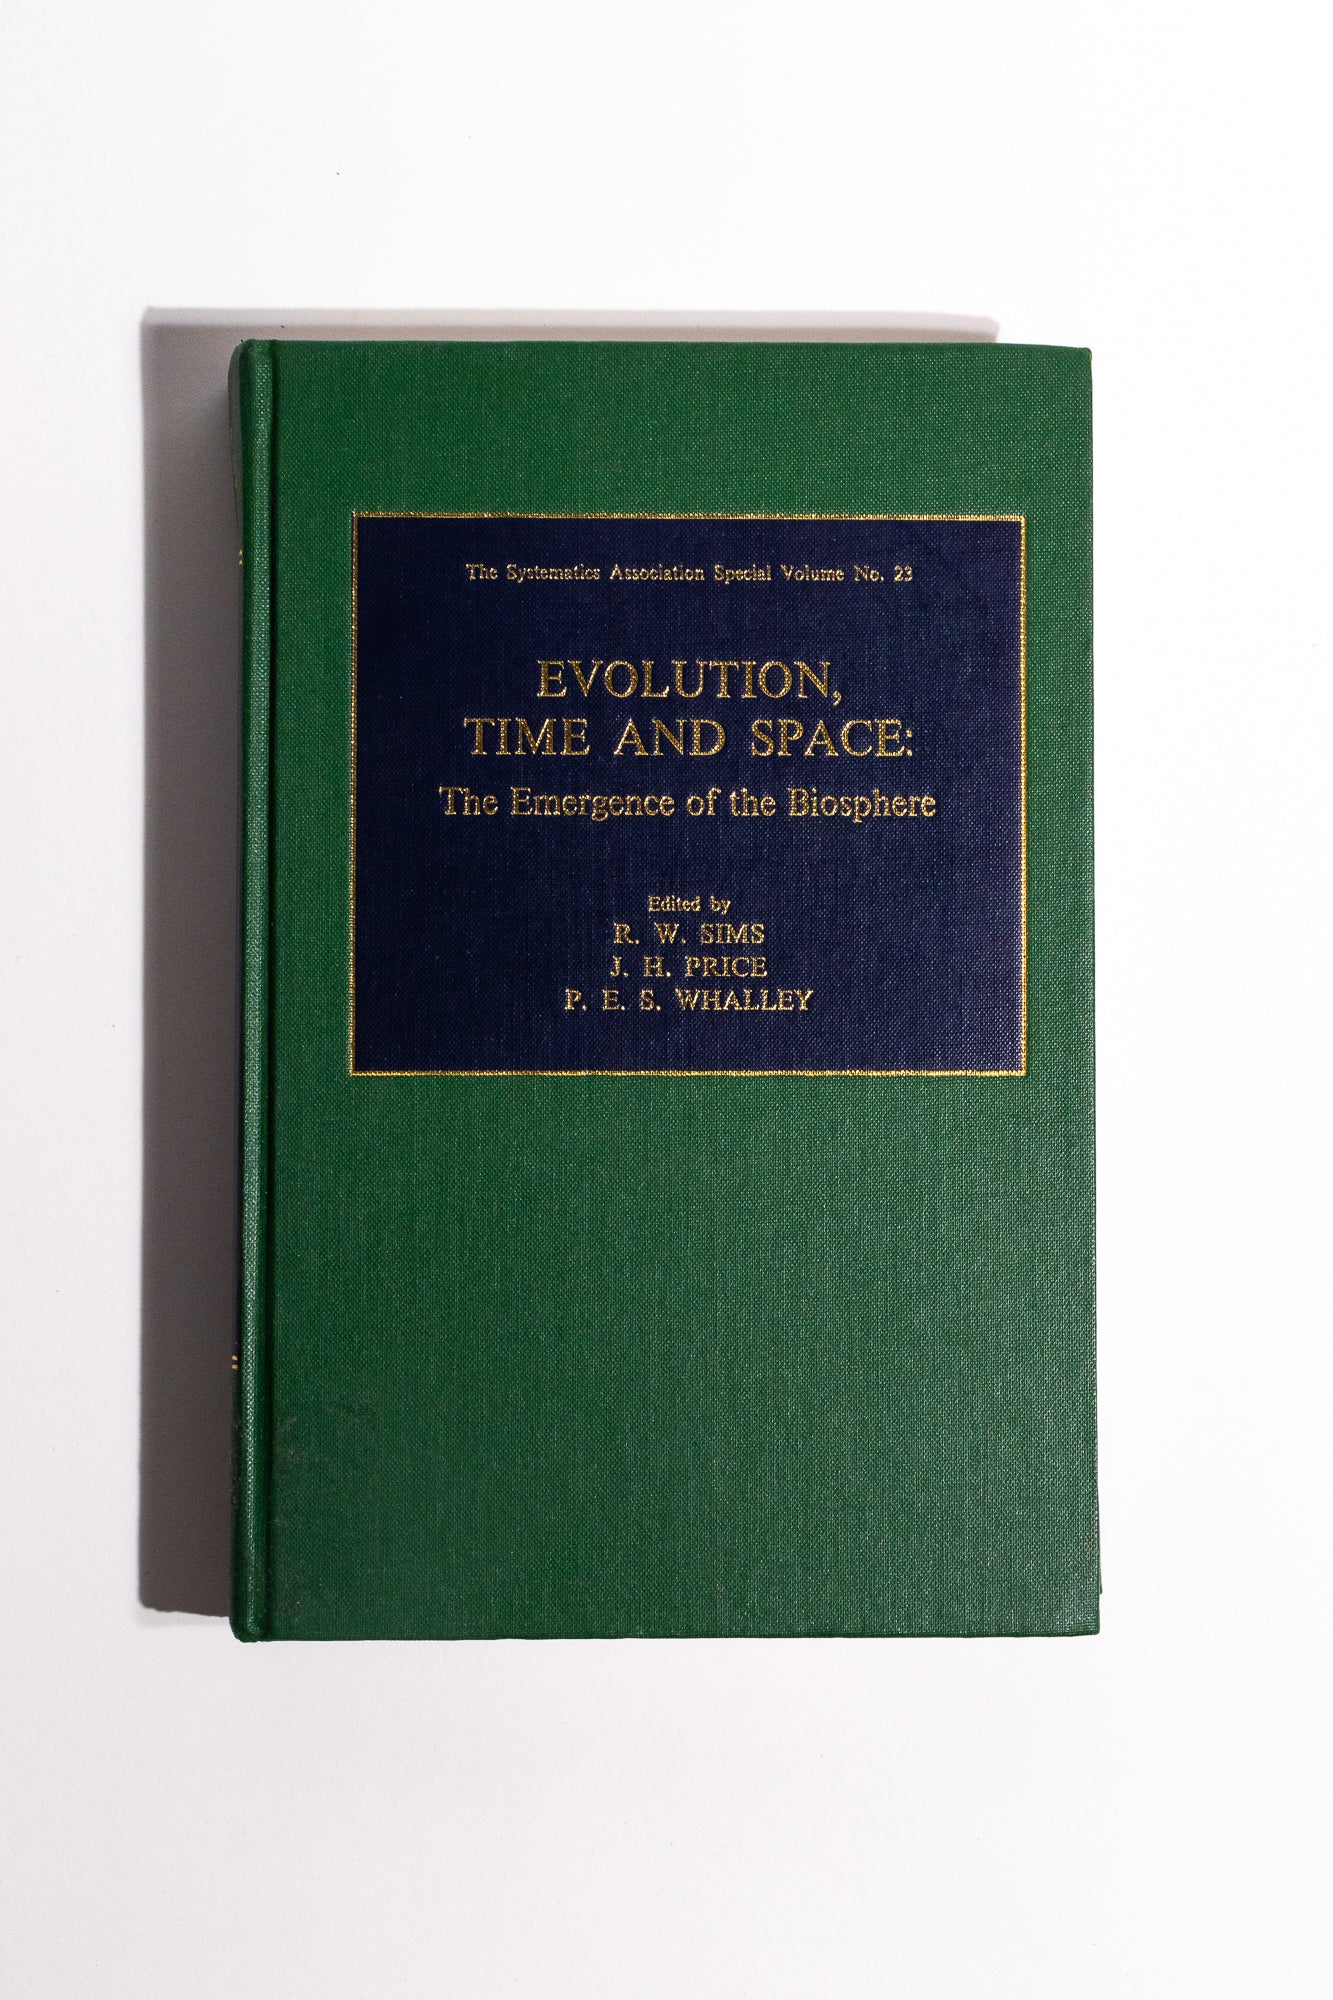 Evolution, Time, and Space: The Emergence of the Biosphere